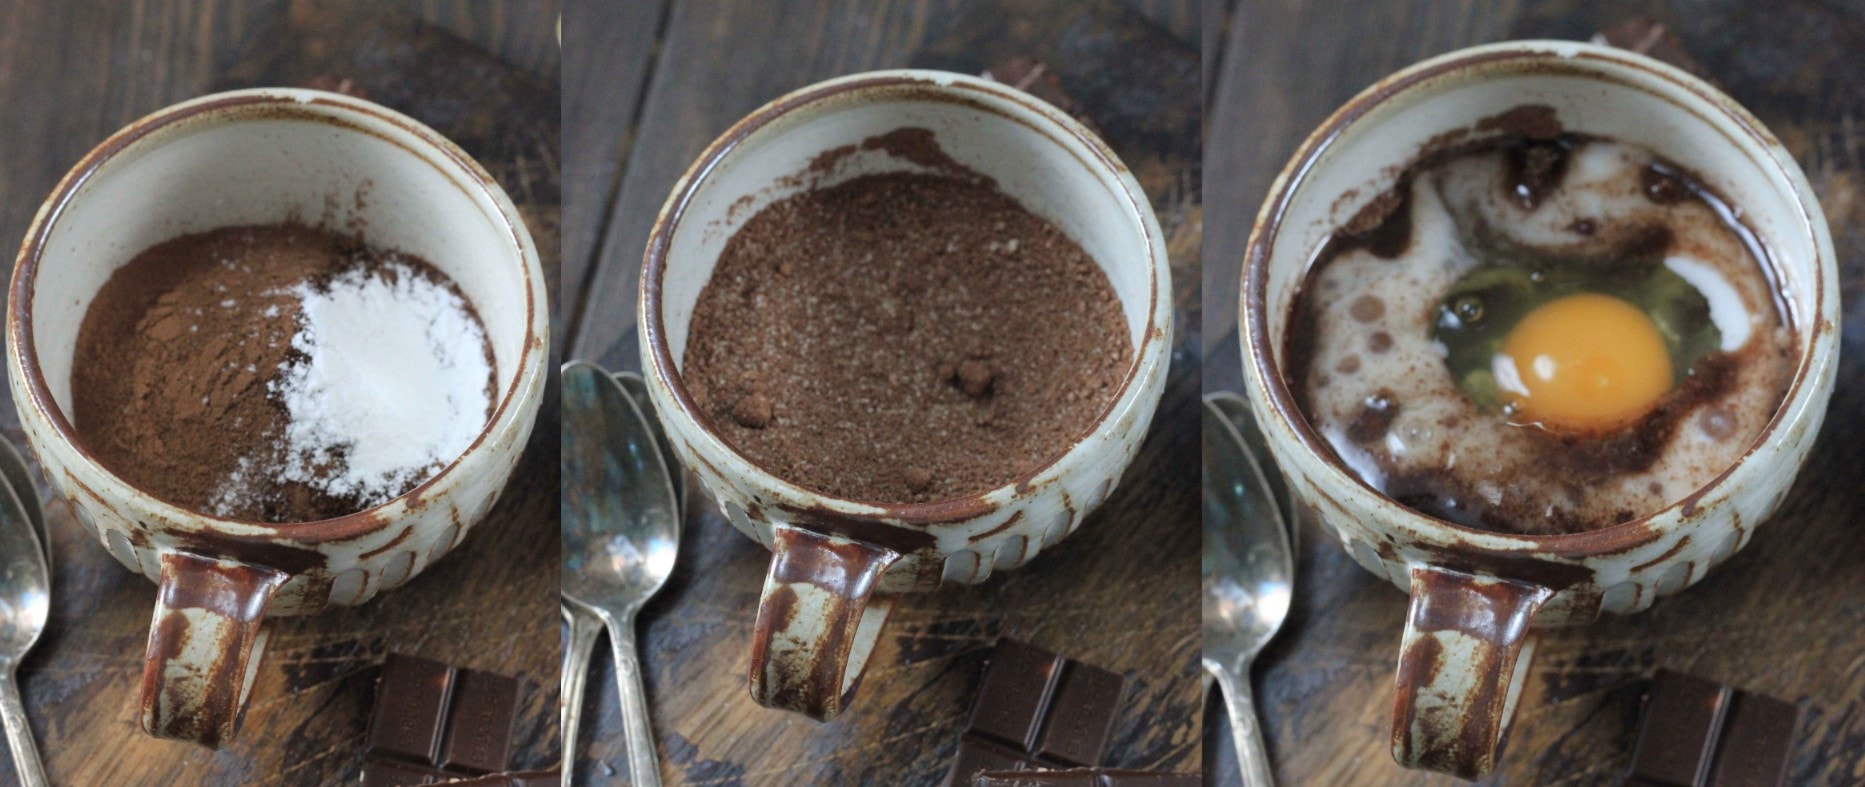 Steps showing how to make a keto mug cake that's completely dairy free.